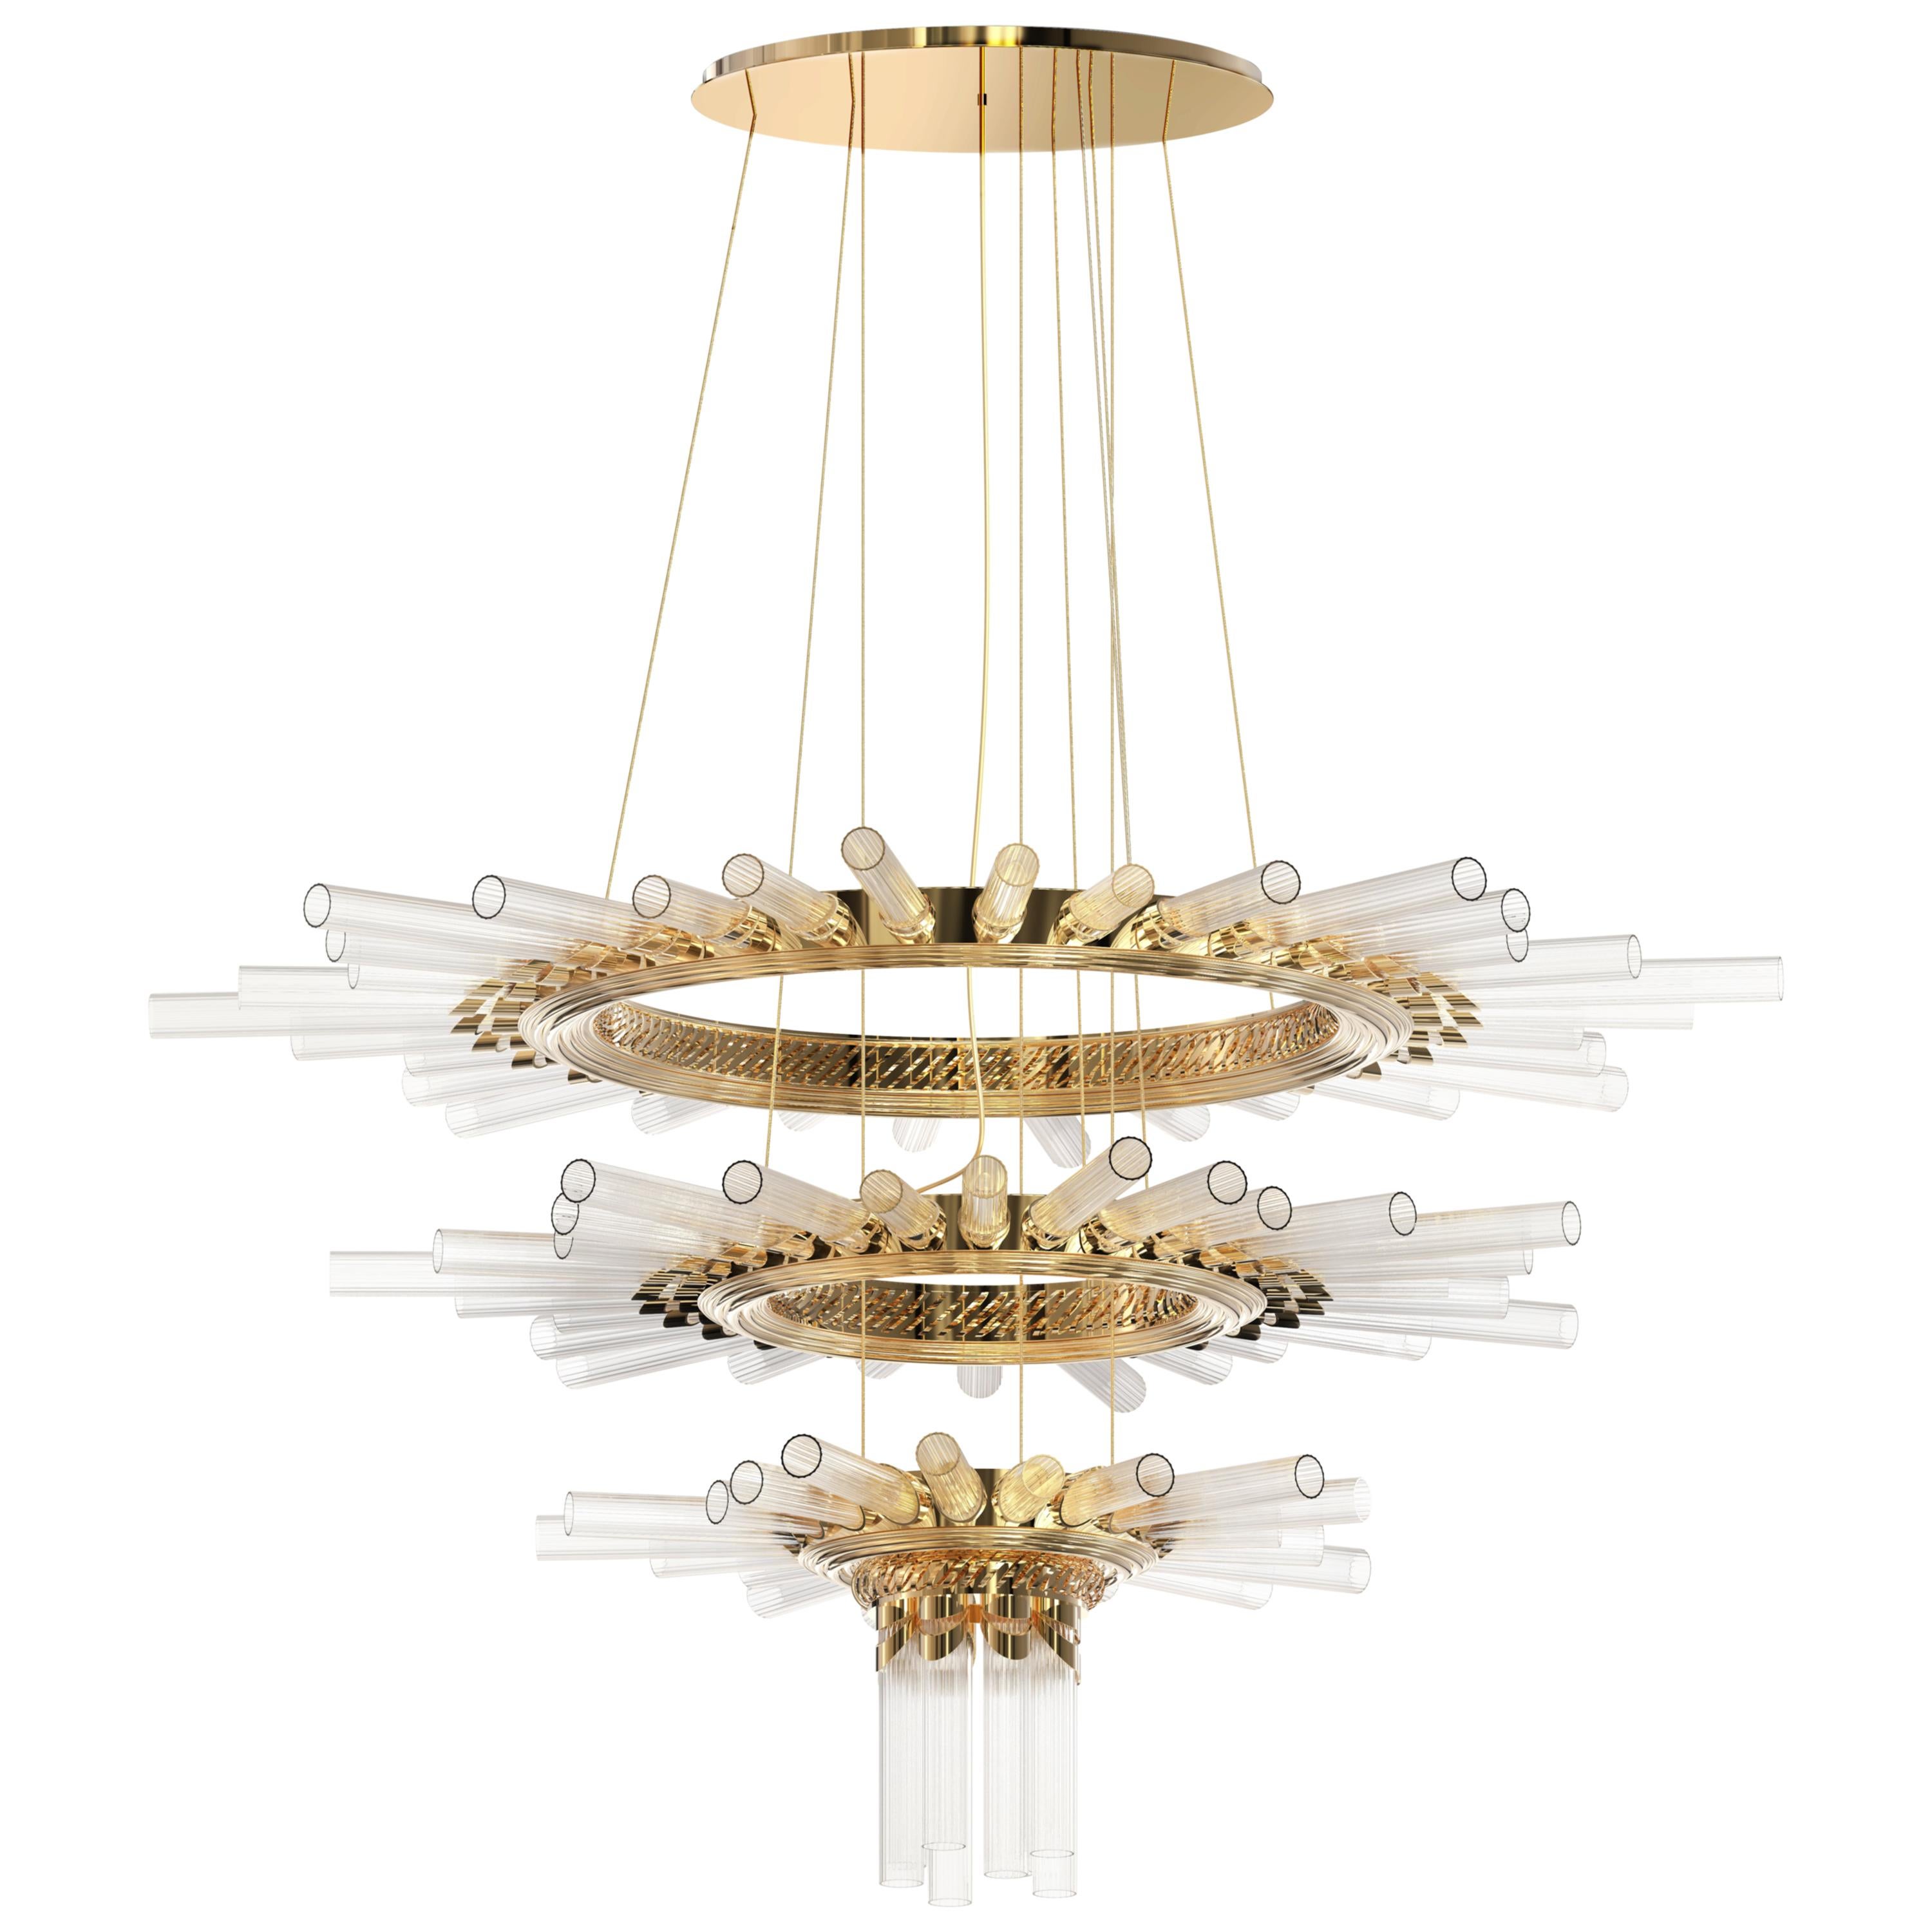 Luxxu Majestic Chandelier in Gold-Plated Brass and Crystal Glass Flute Details For Sale